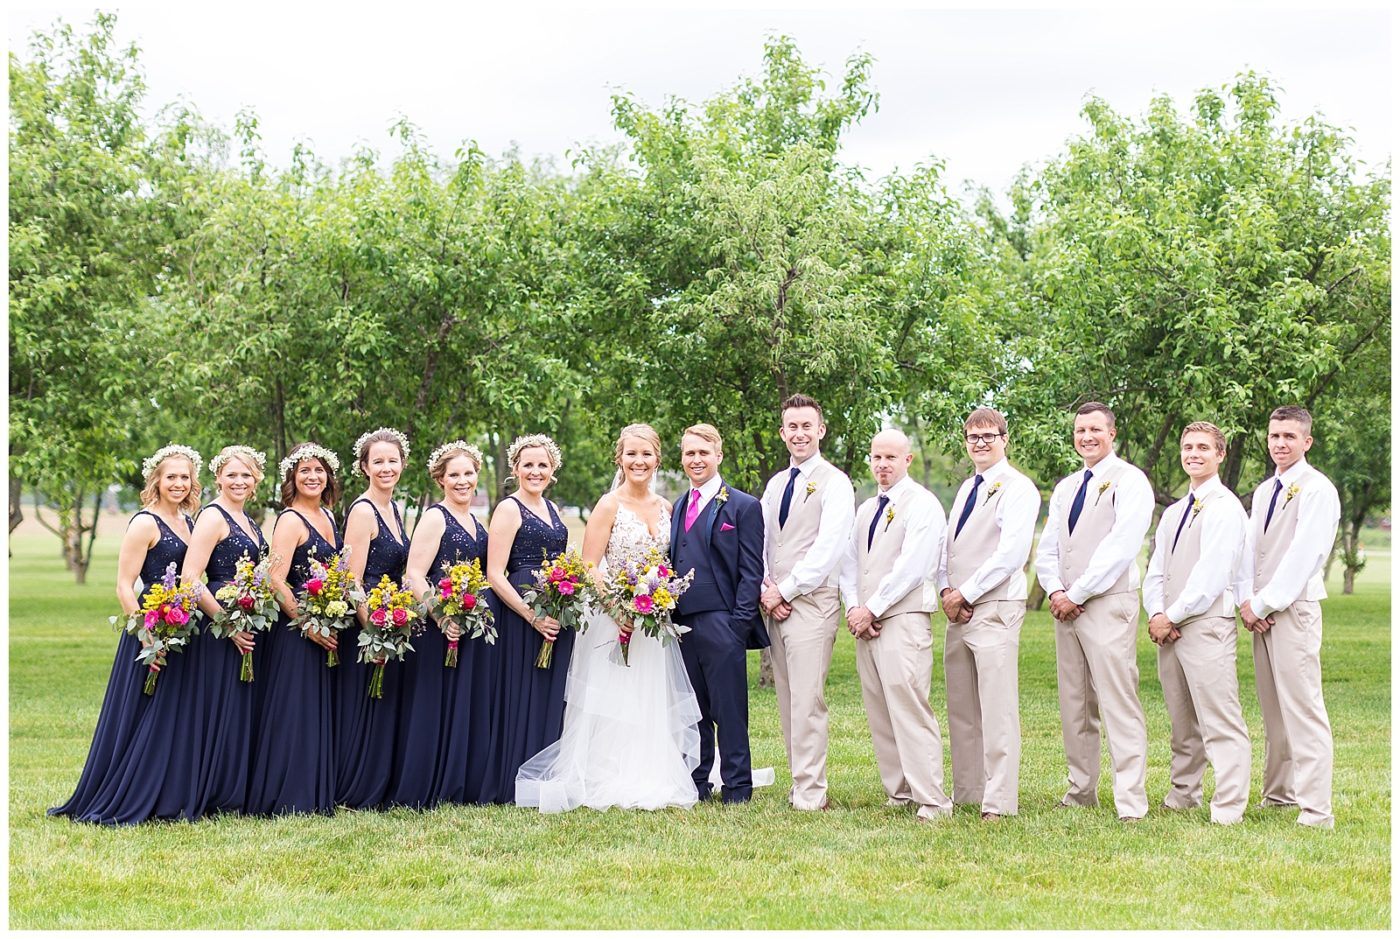 All groomsmen and bridesmaids standing with the bride and groom smiling and looking at the camera during bridal party photos